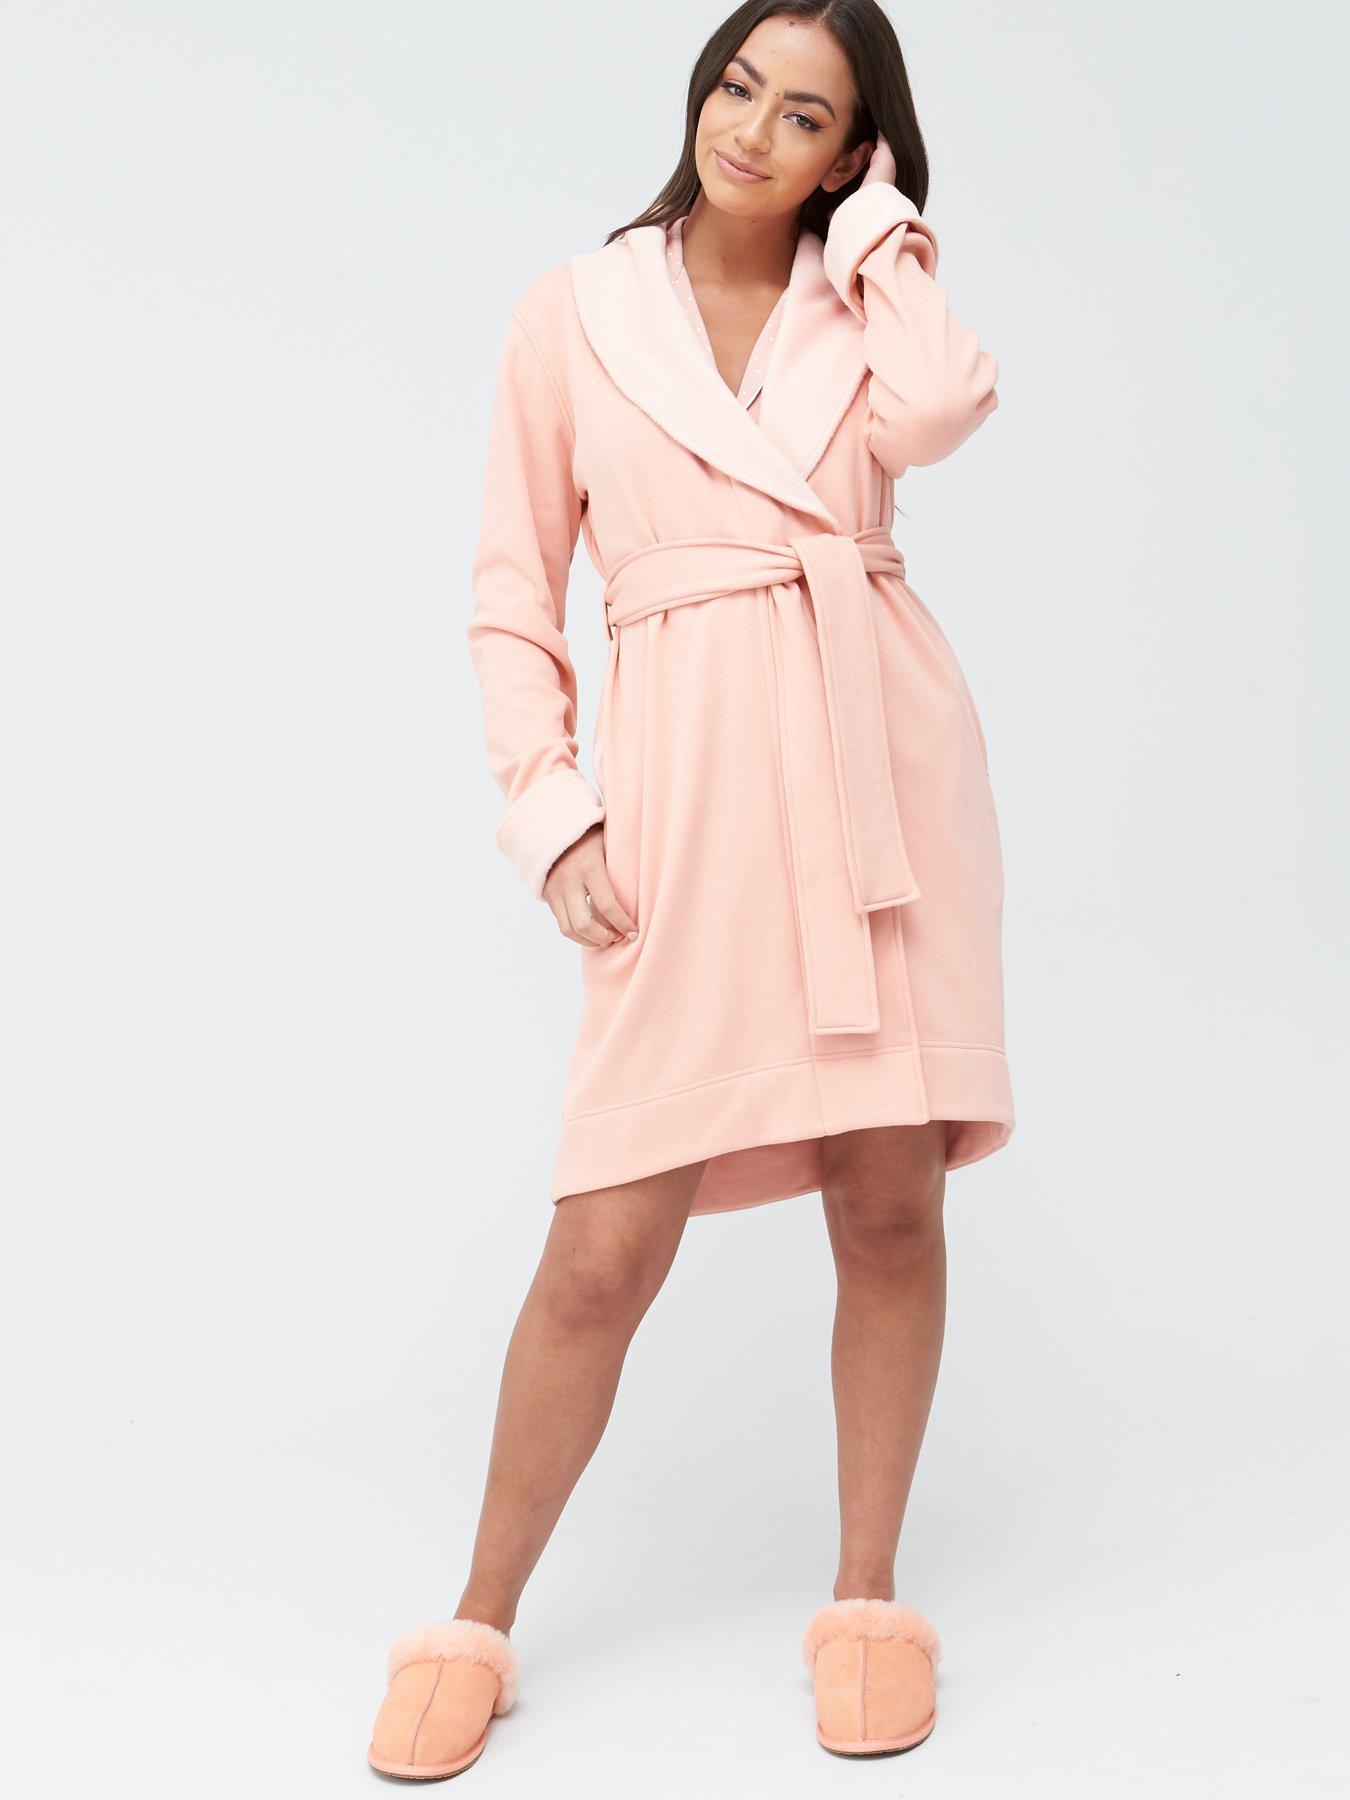 UGG Blanche Dressing Gown - LA Sunset 